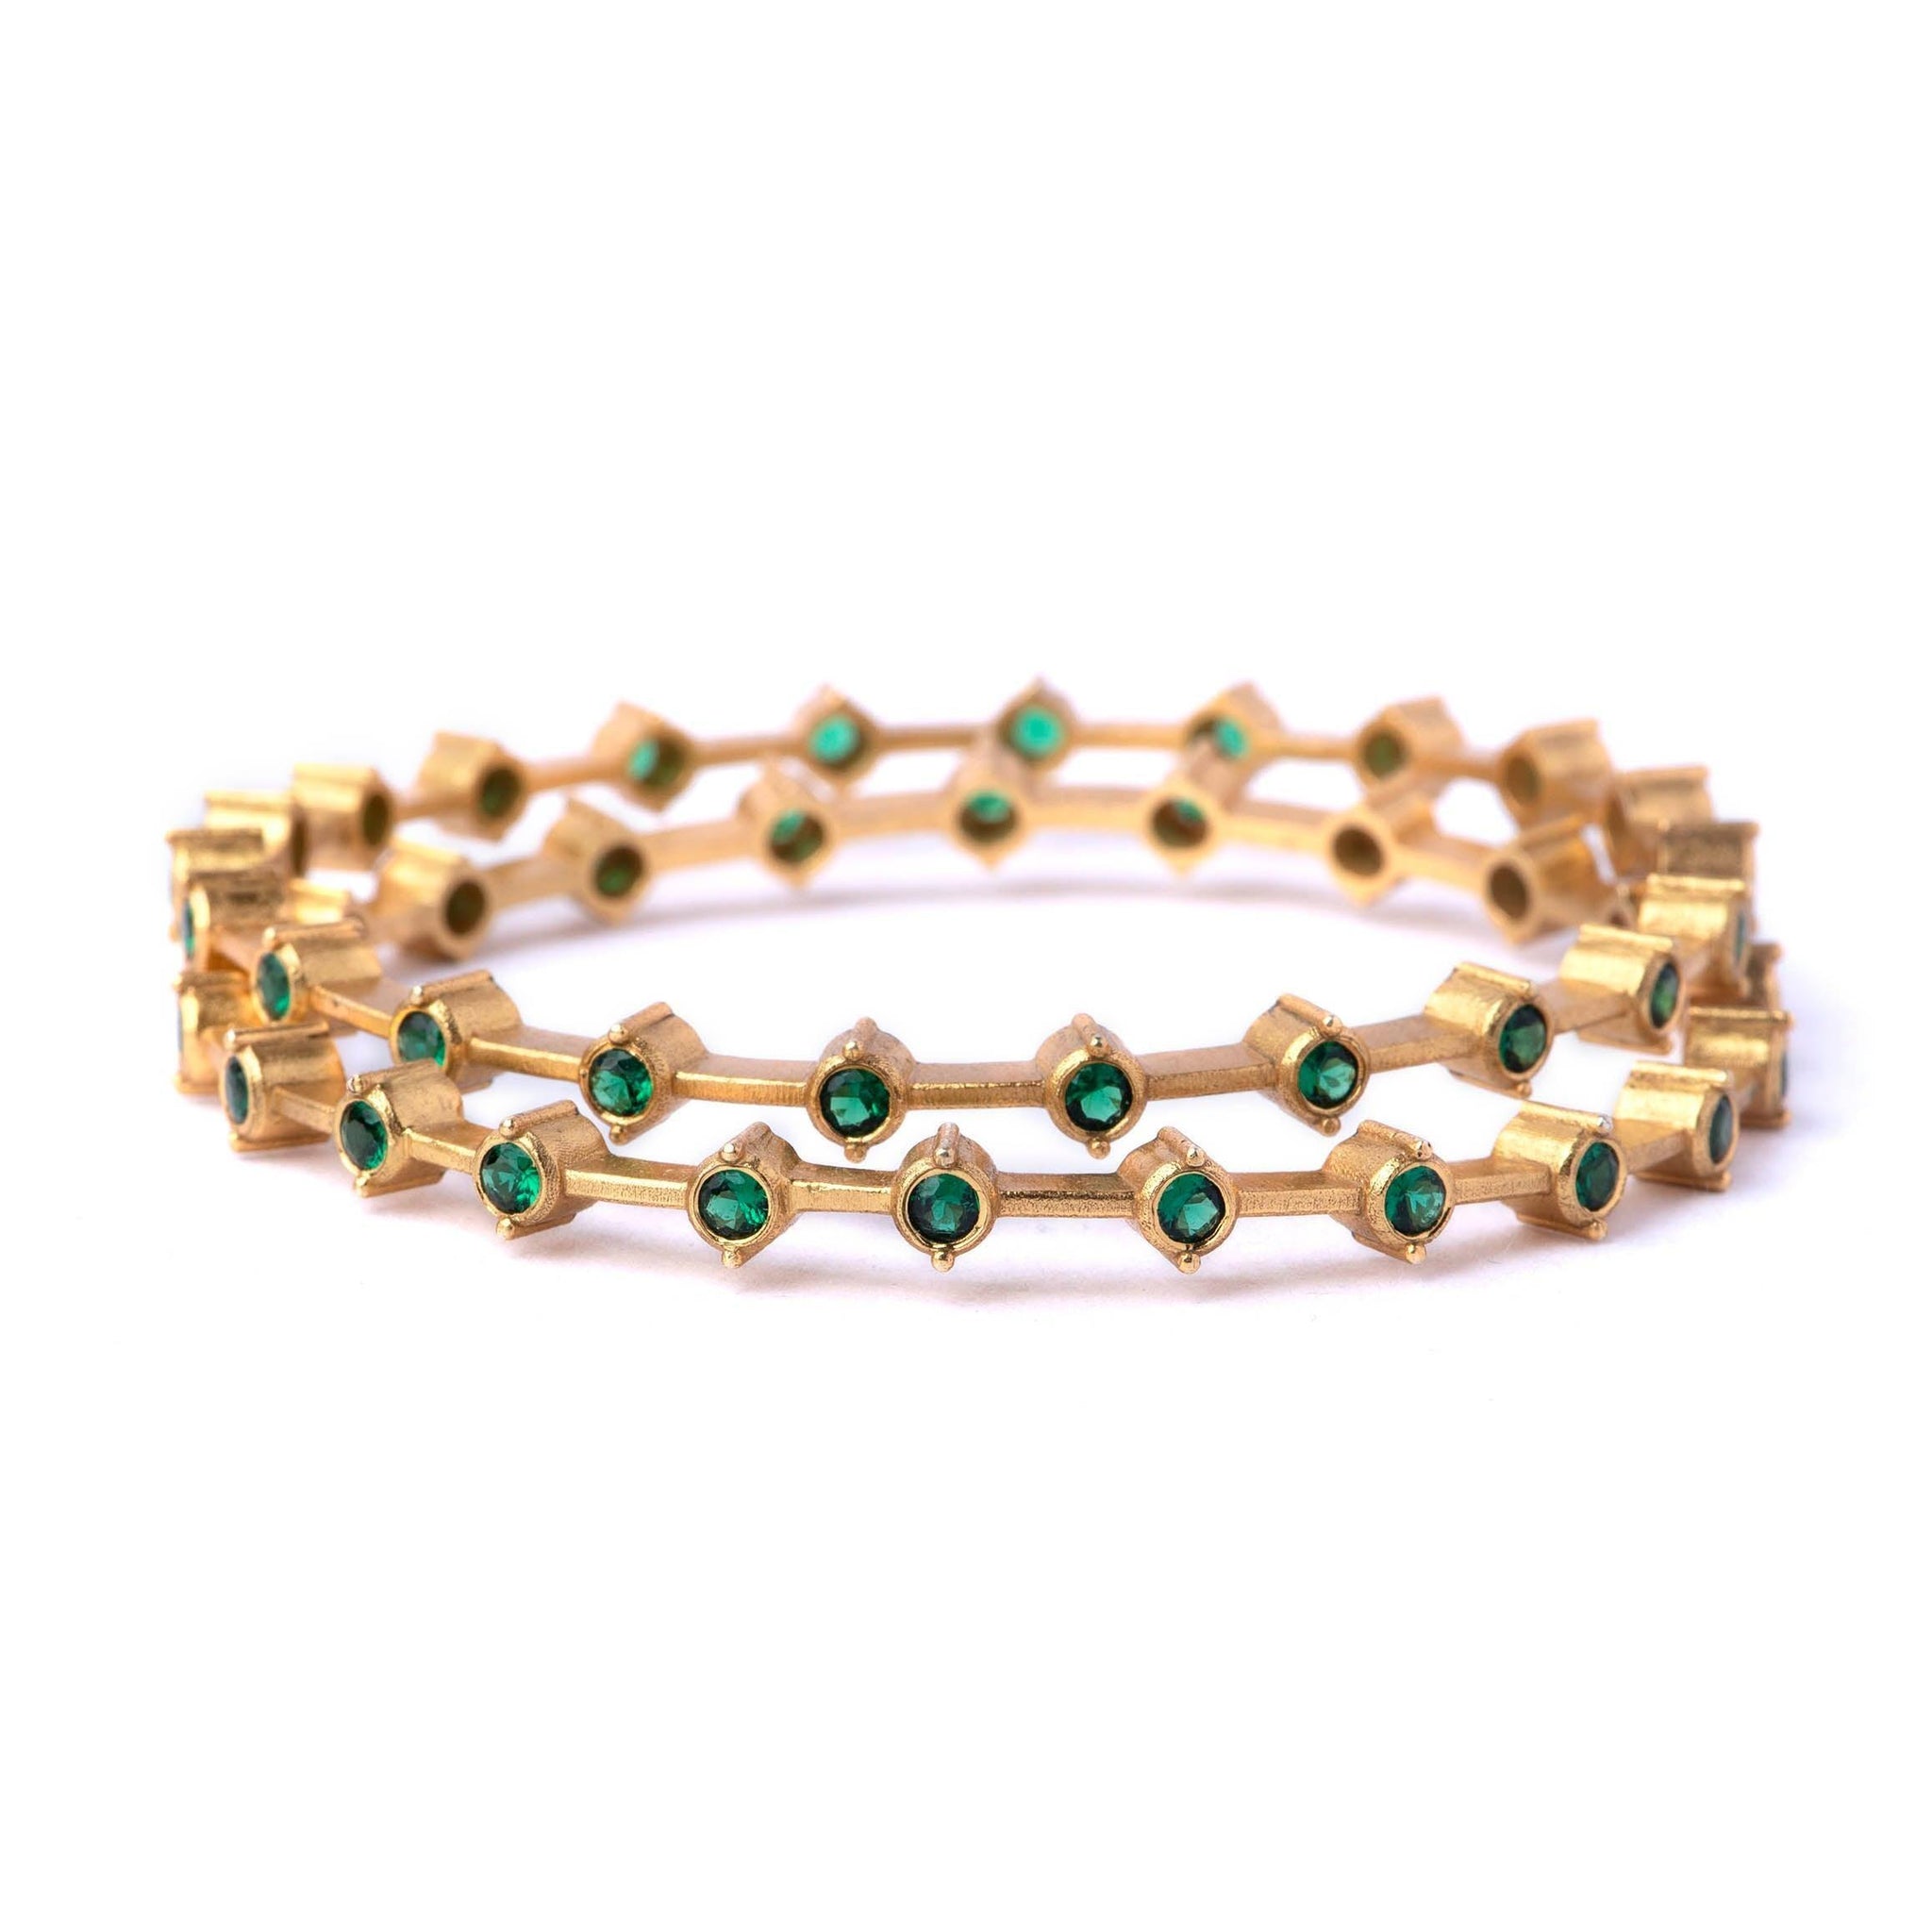 925 Sterling Silver & Diamond With Natural Green Emerald Bracelet For Women  And Handmade Bracelet at Rs 25000 | Second Hand Diamond Jewelry in Jaipur |  ID: 2852047880633